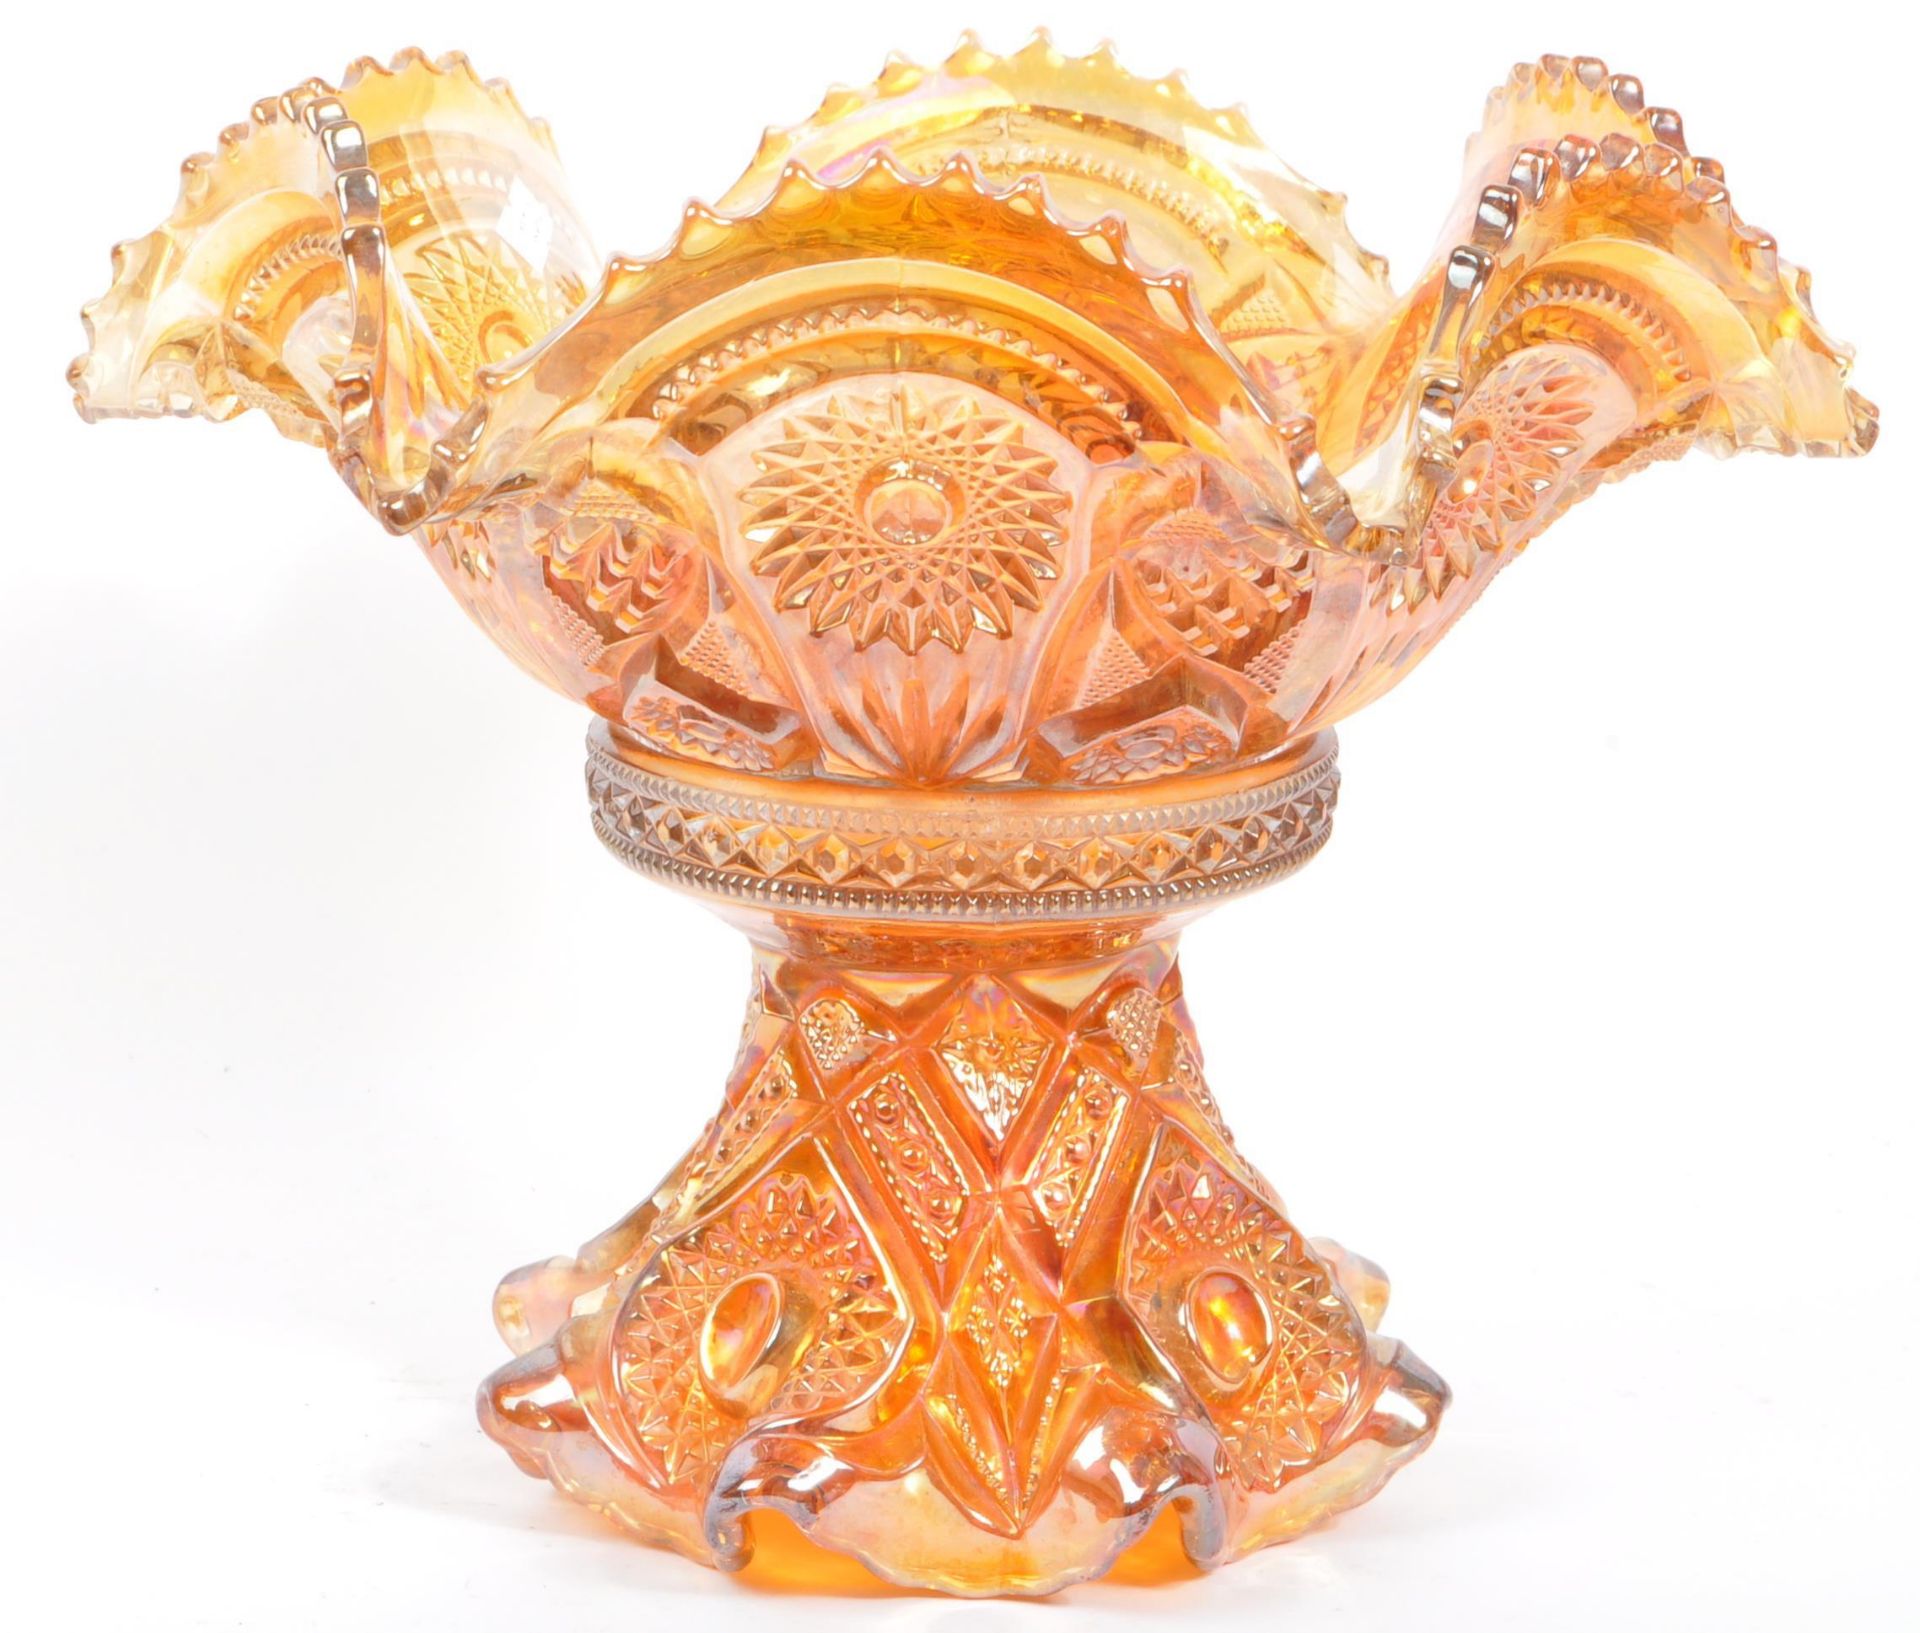 IRIDESCENT CARNIVAL GLASS MARIGOLD PUNCH BOWL - Image 6 of 10